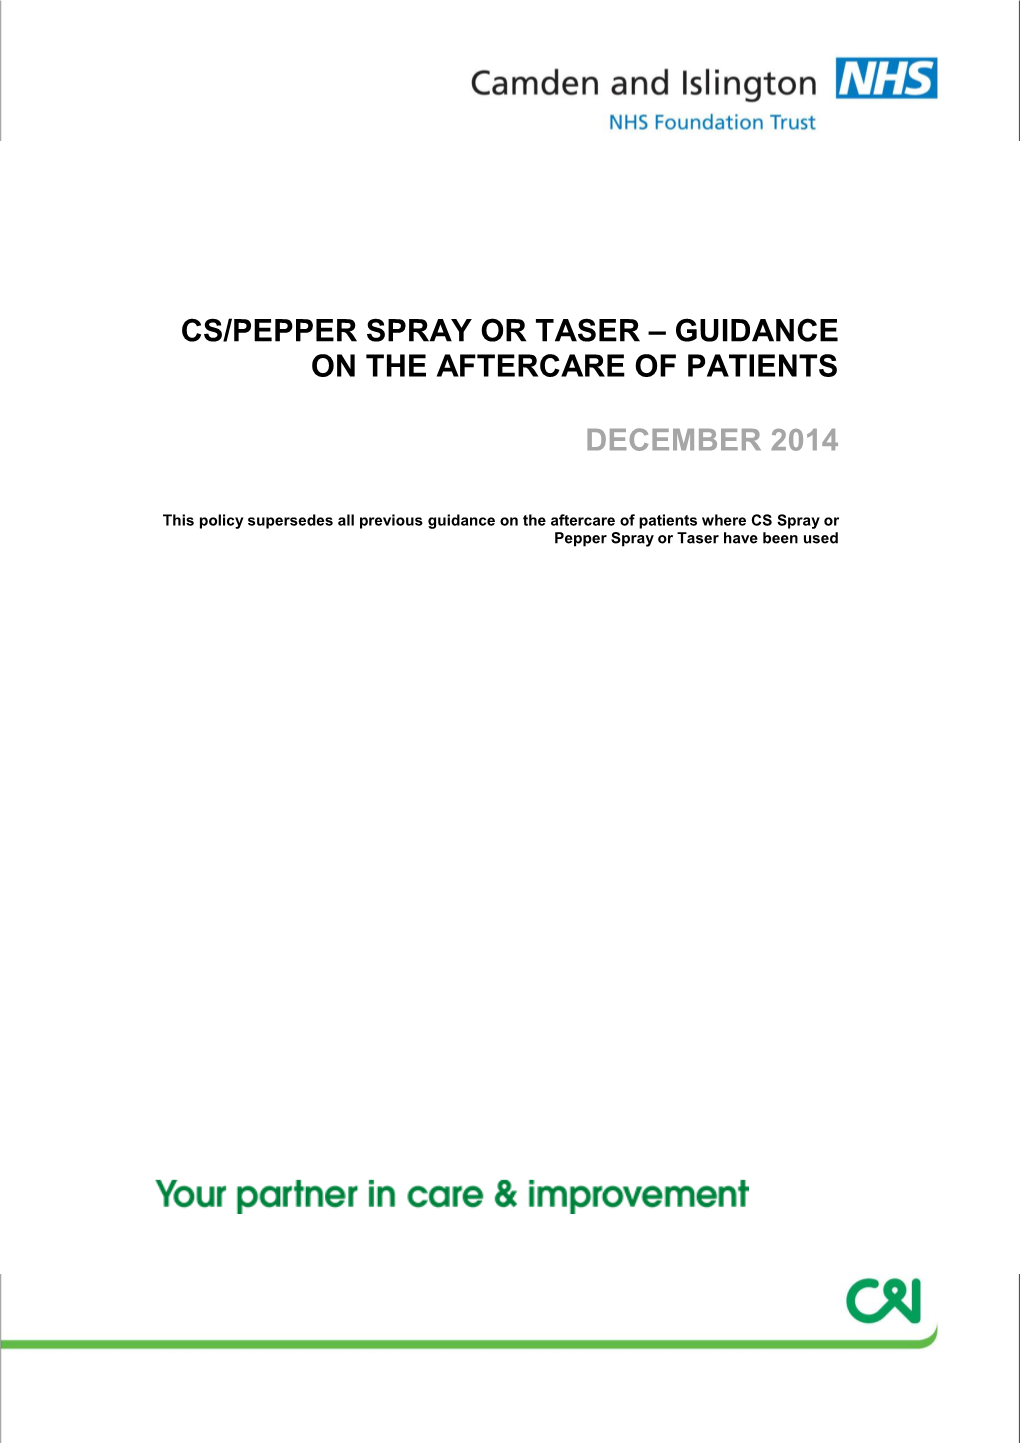 CS and Pepper Spray and Taser Aftercare Guidance